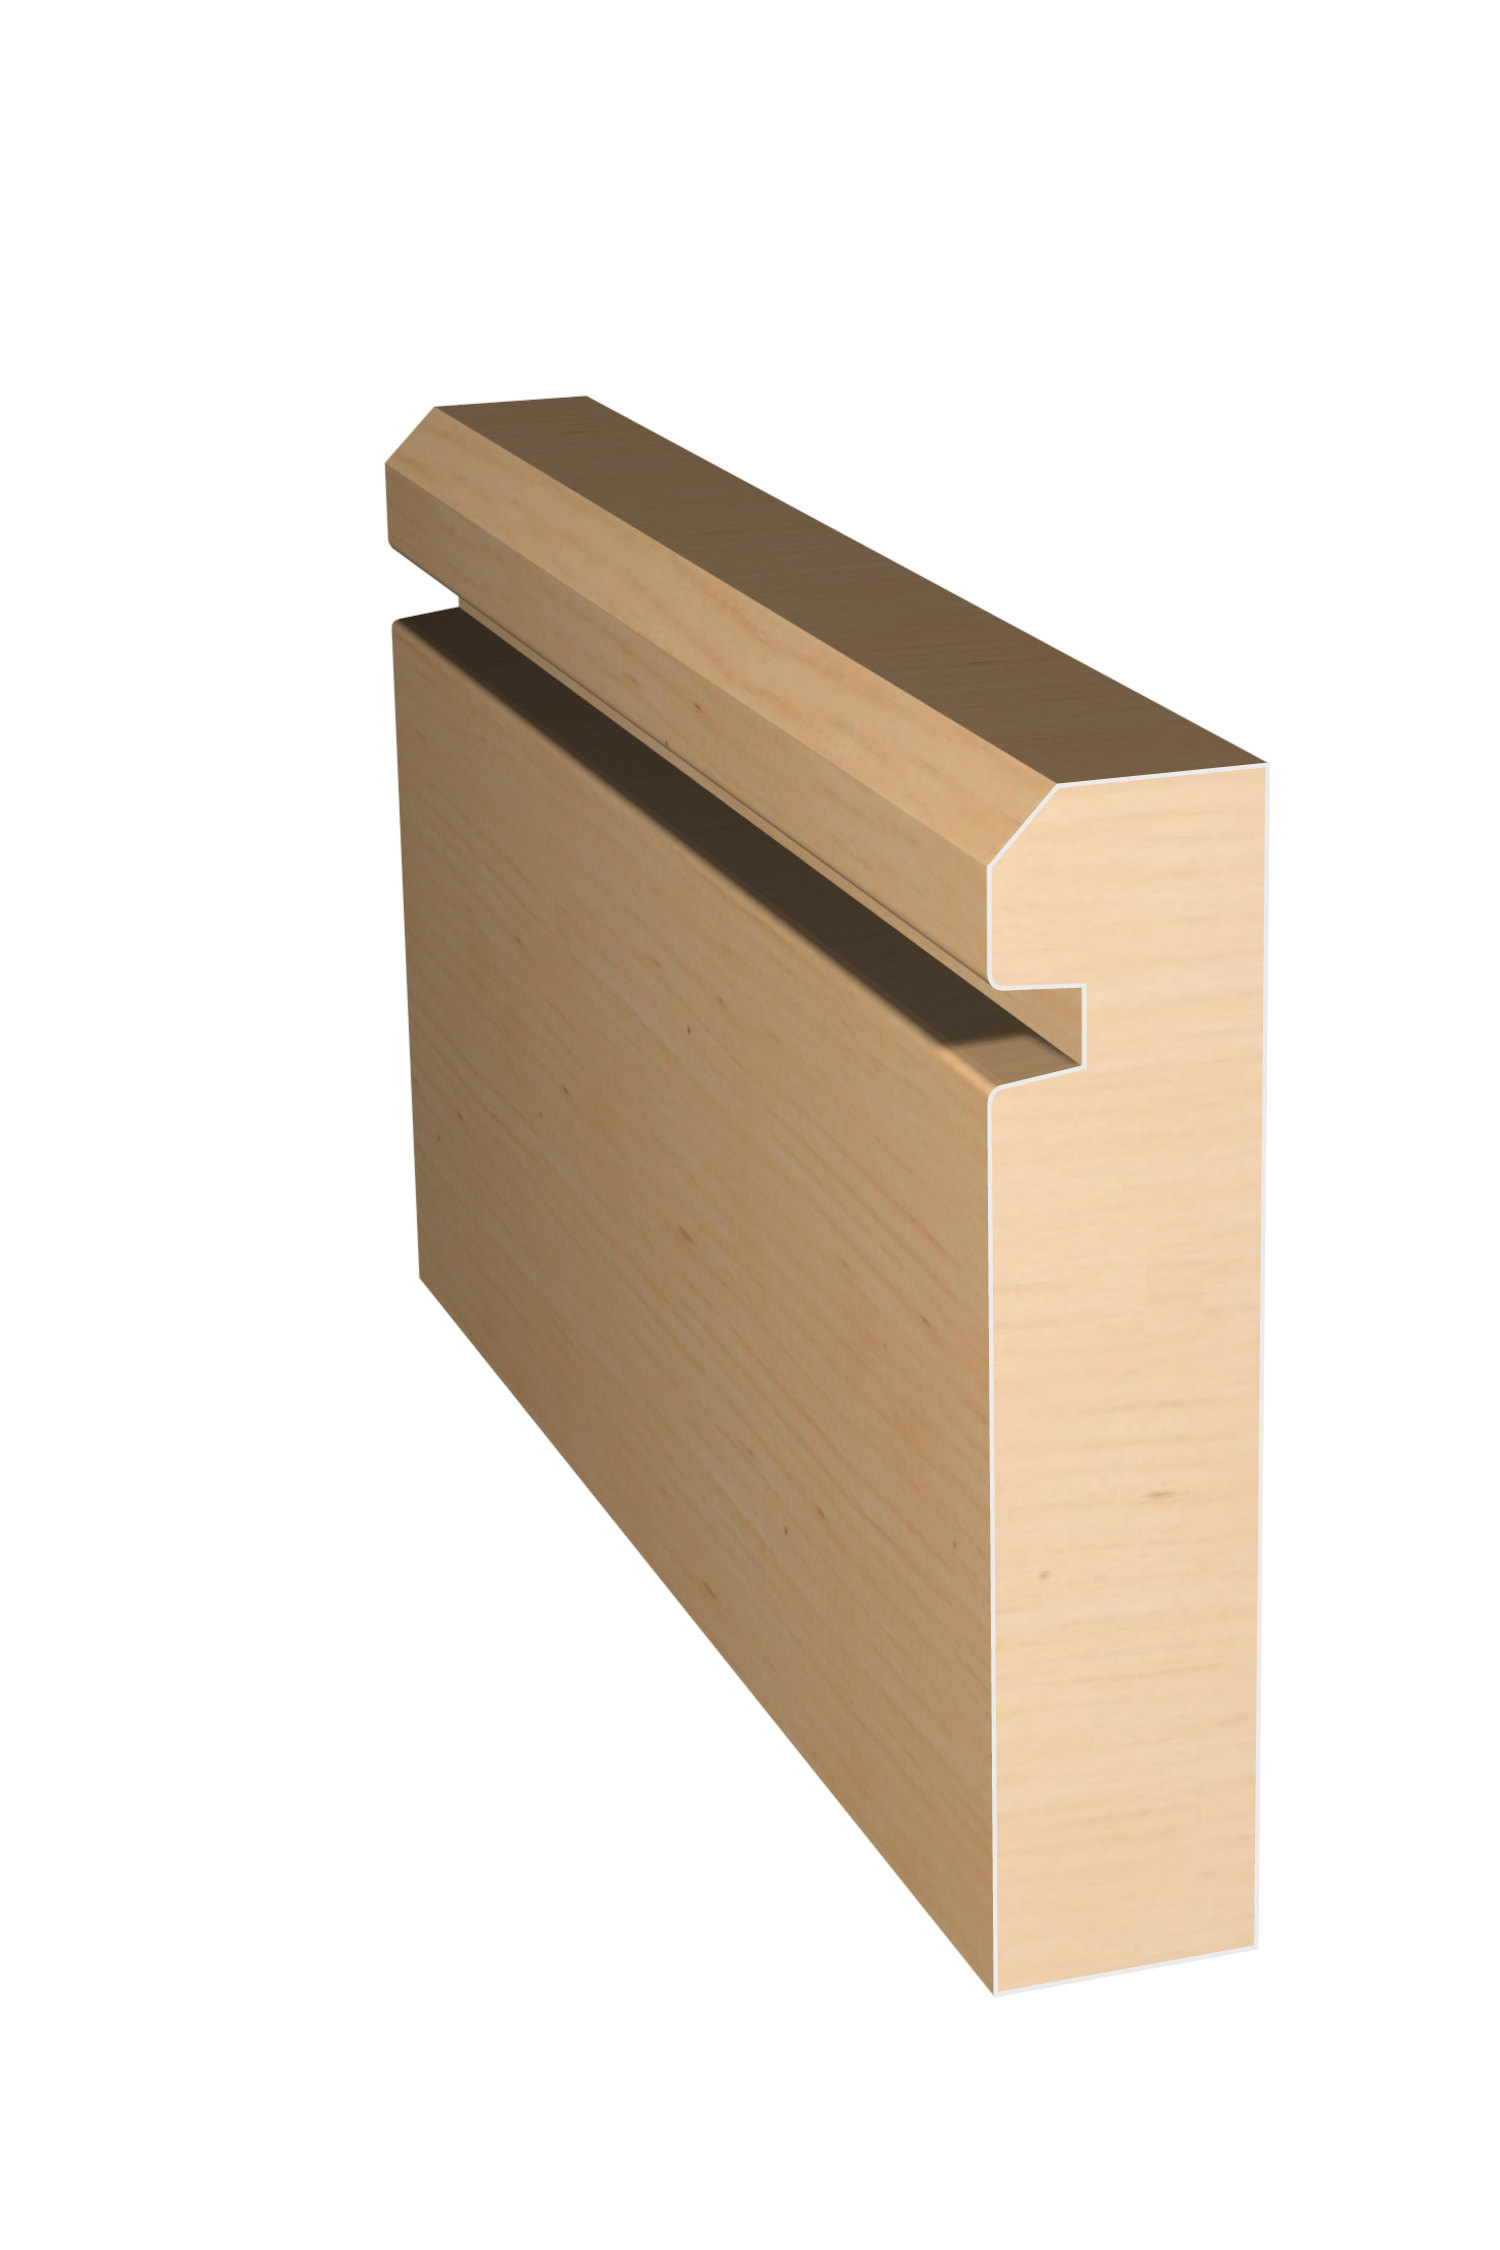 Three dimensional rendering of custom casing wood molding CAPL3146 made by Public Lumber Company in Detroit.